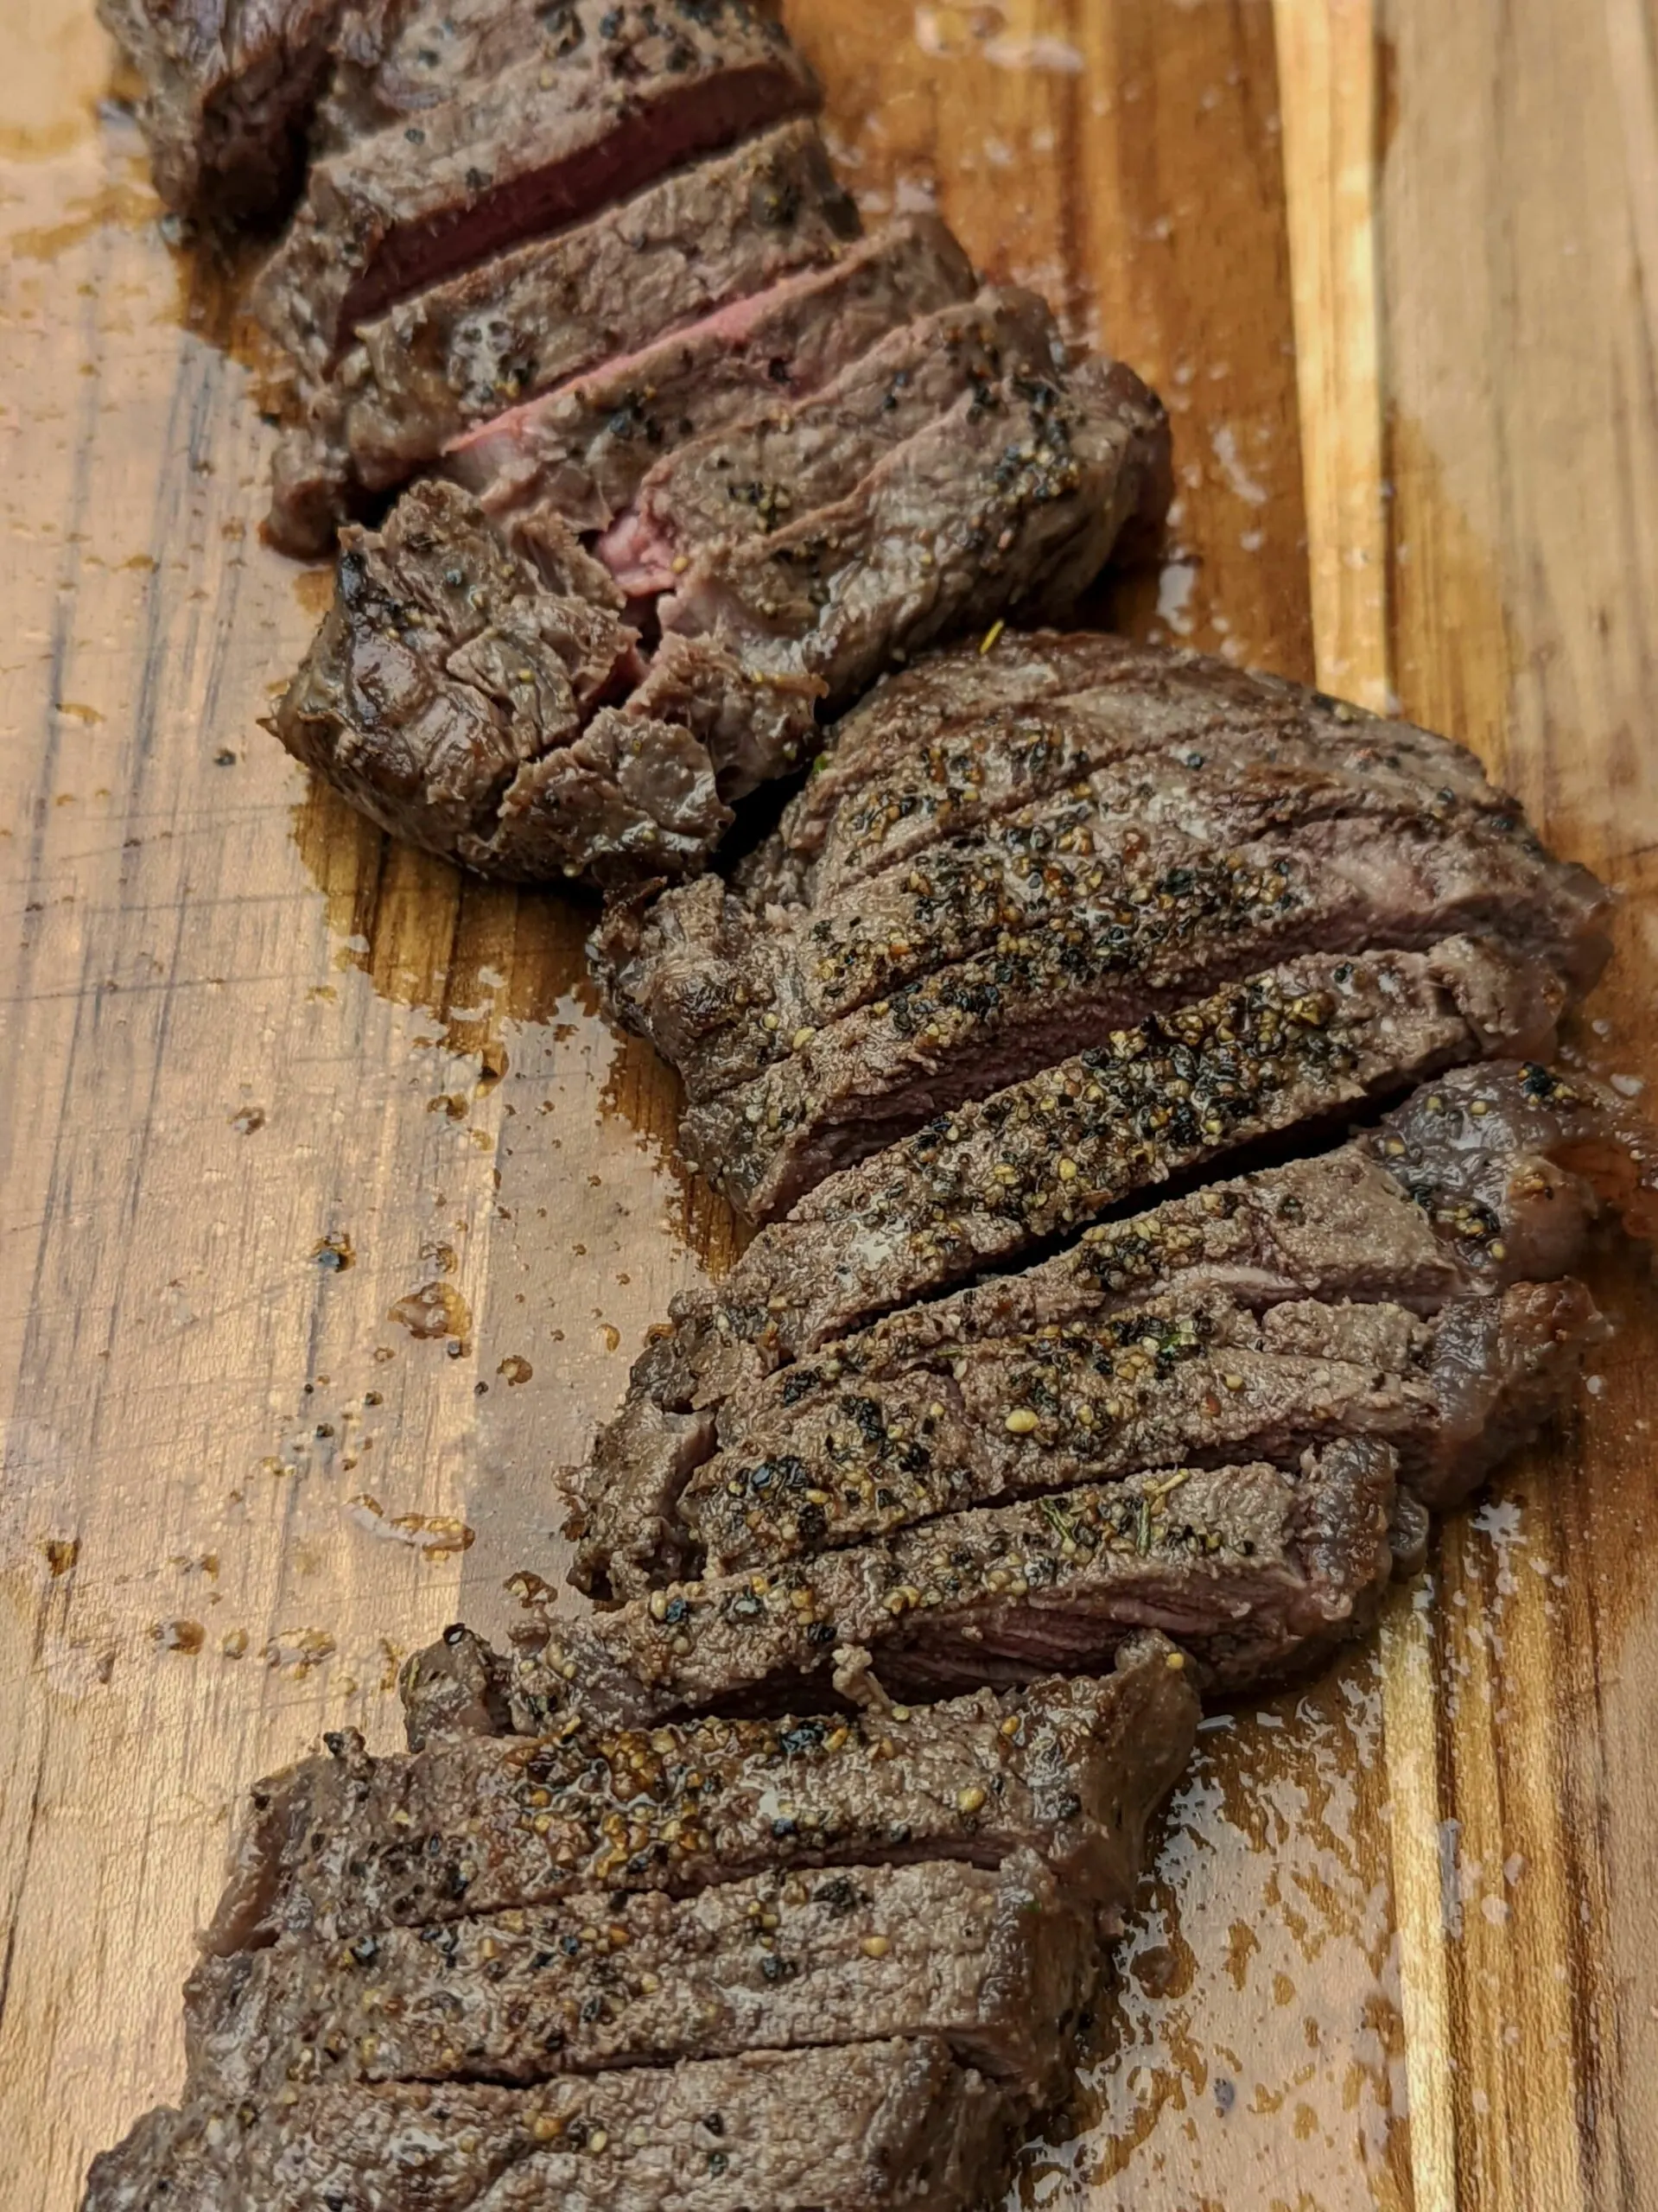 Bison steak on a cutting board and sliced into pieces.